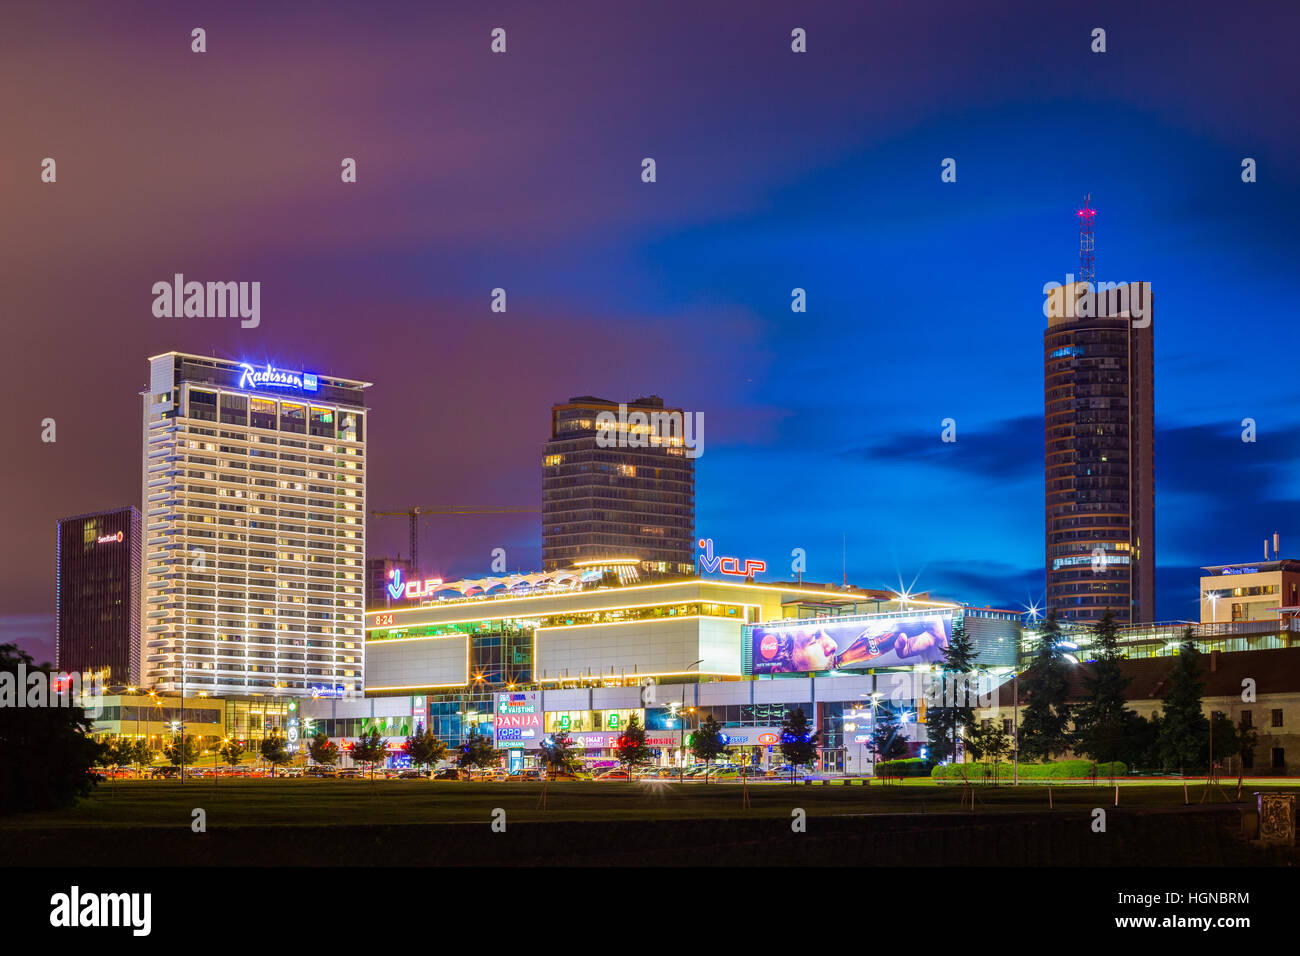 Vilnius, Lithuania - July 7, 2016: Night Evening View Of Radisson Blu Hotel and shopping centre Vilnius Central Department Store VCUP in Vilnius, Lith Stock Photo